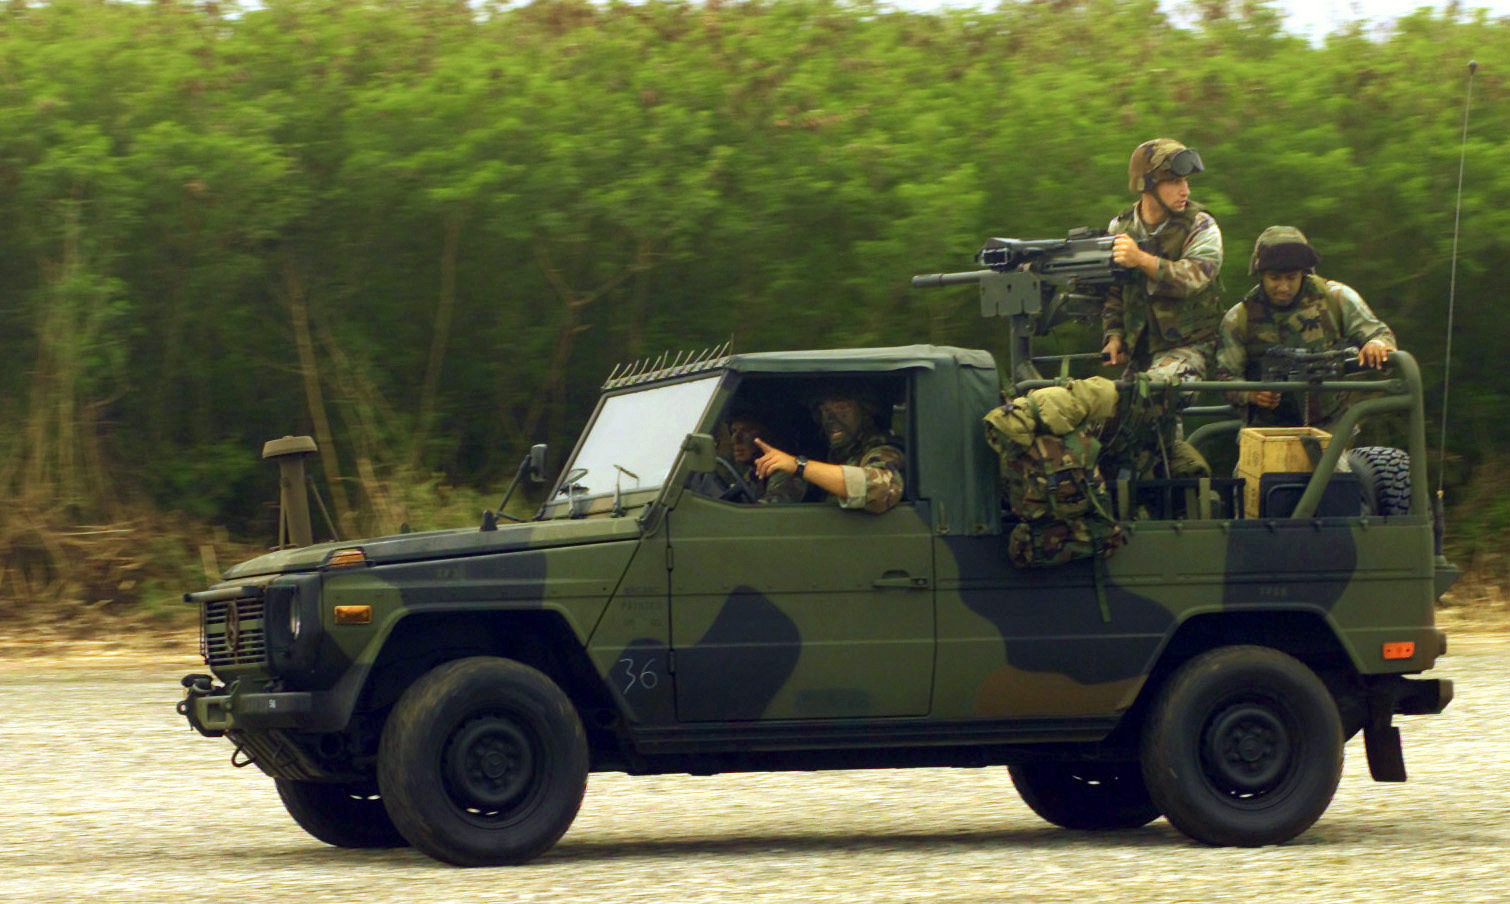 Marines from Weapons Company (WC), 2nd Battalion, 4th Marine Regiment race their Interim Fast Attack Vehicle (IFAV) along the North Field, on Tinian Island, in support of Exercise TANDEM THRUST 2003.